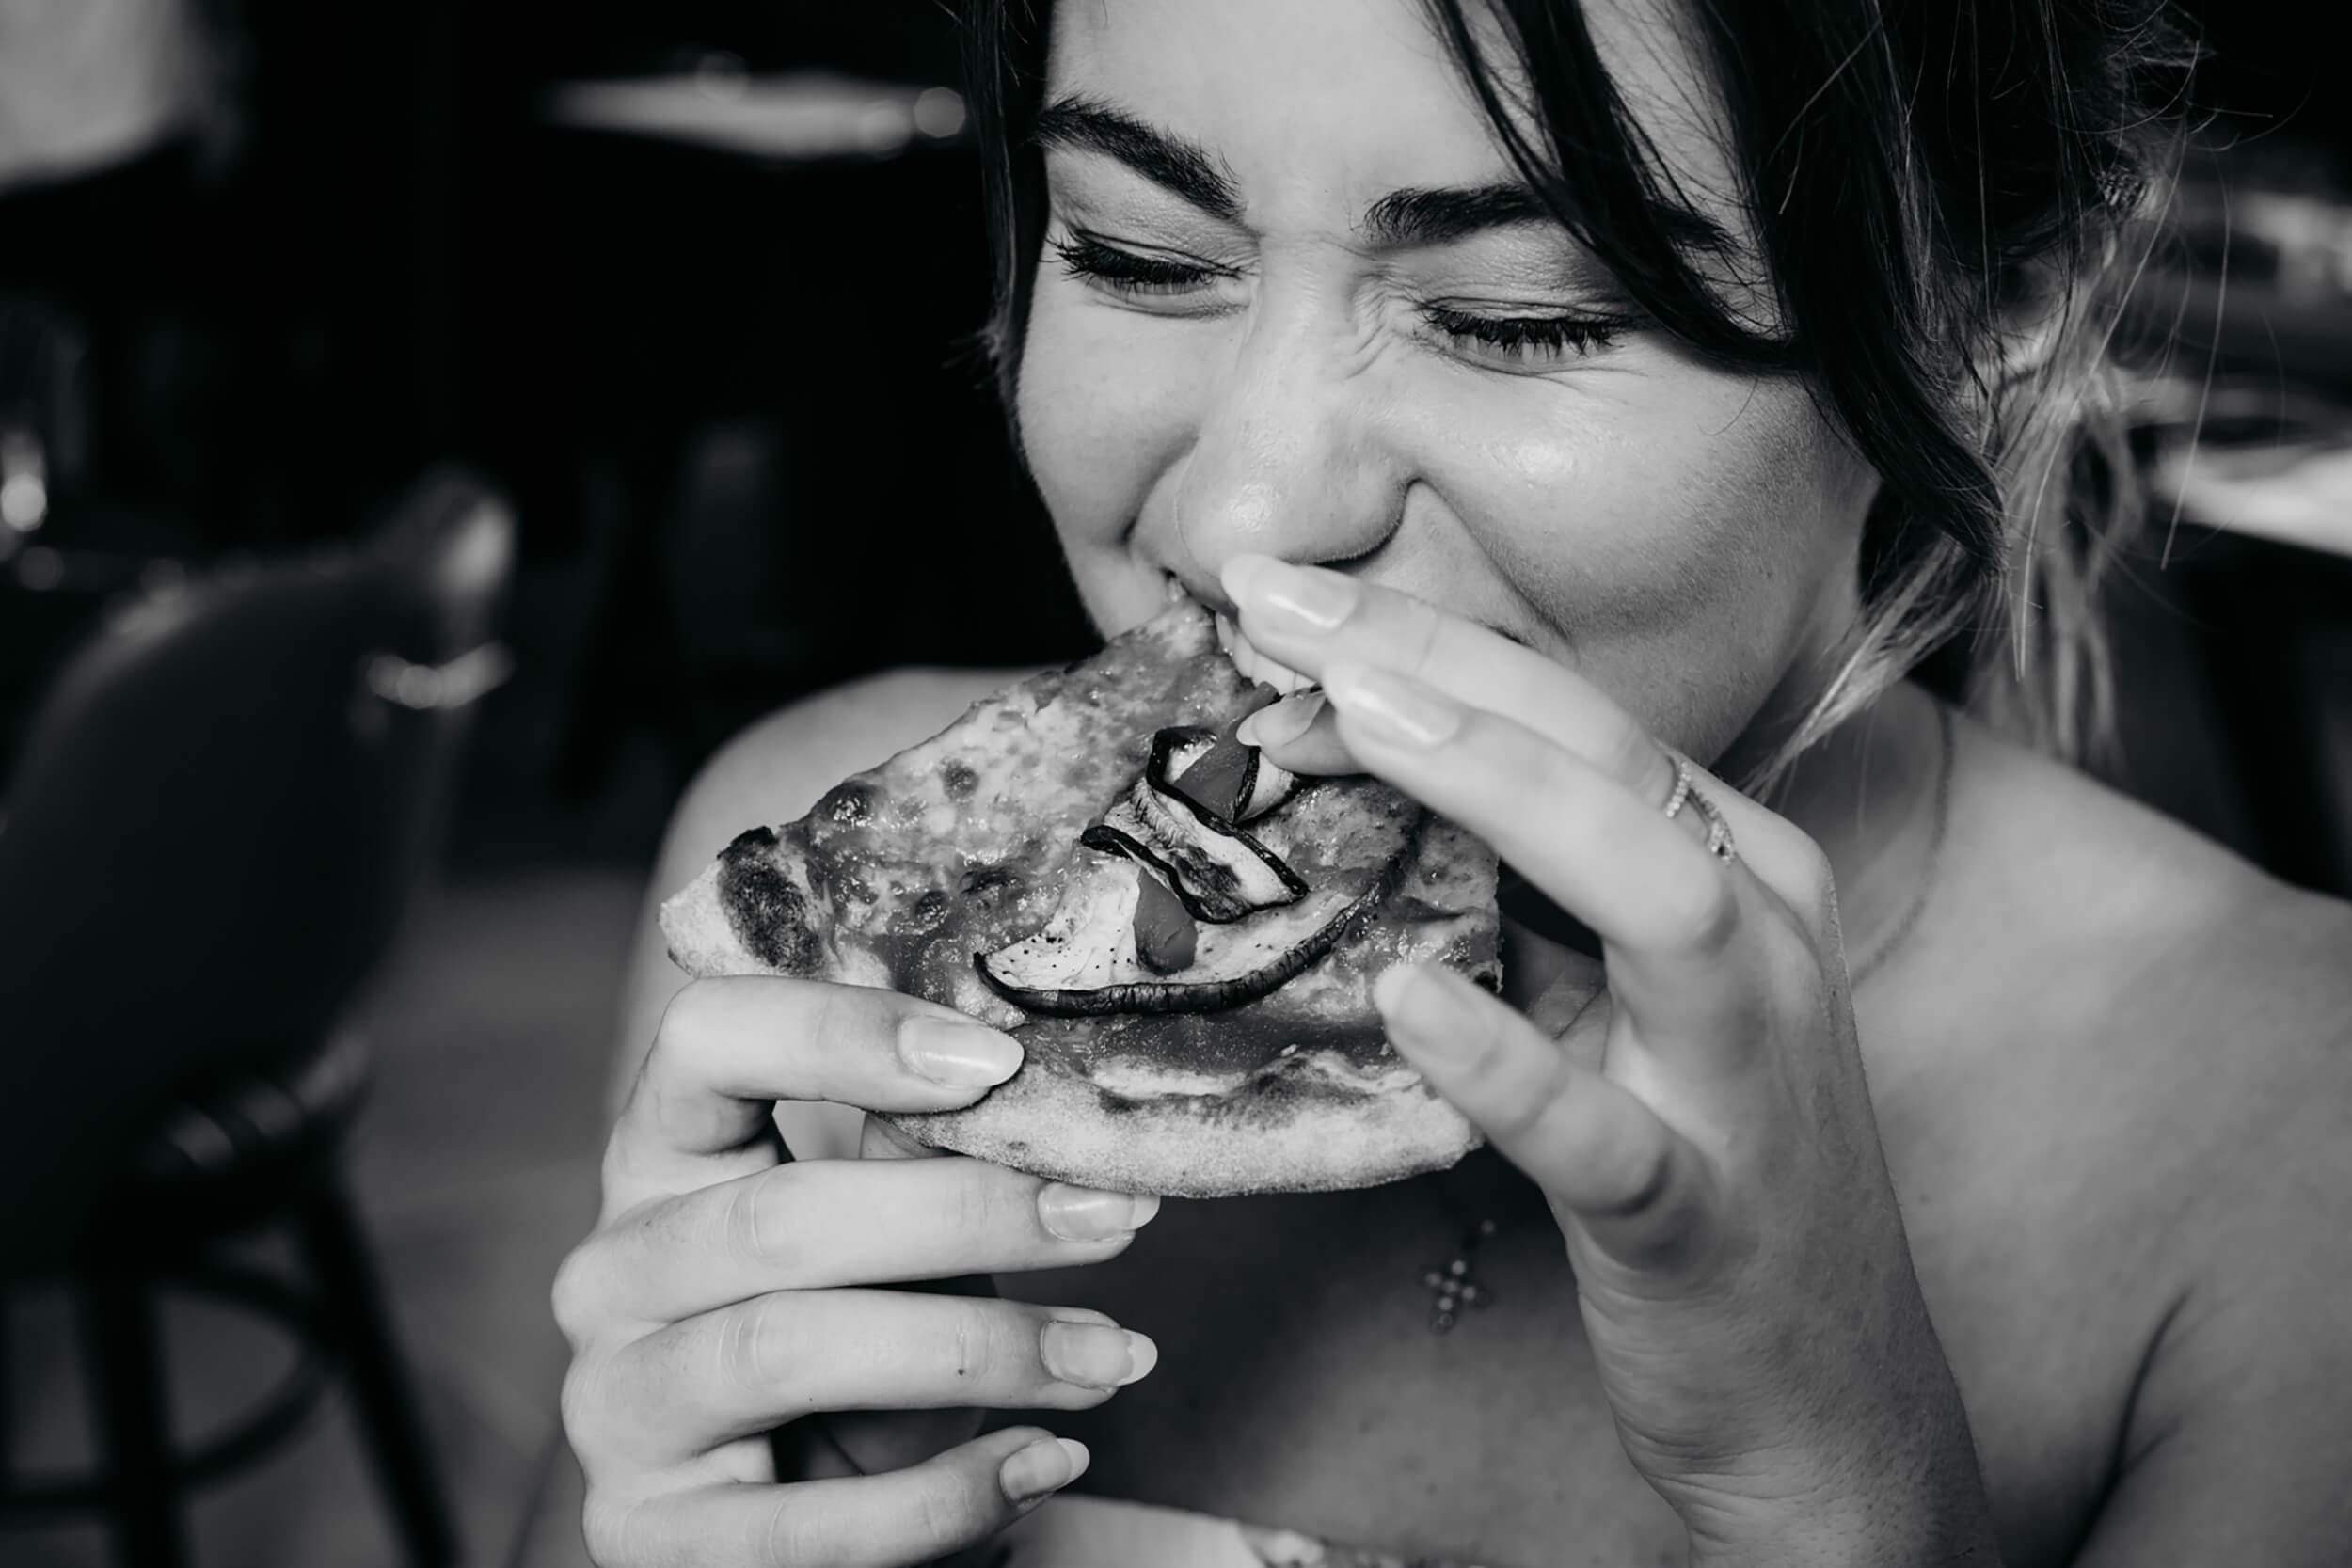 Woman taking a bite out of a pizza. The image is black and white.